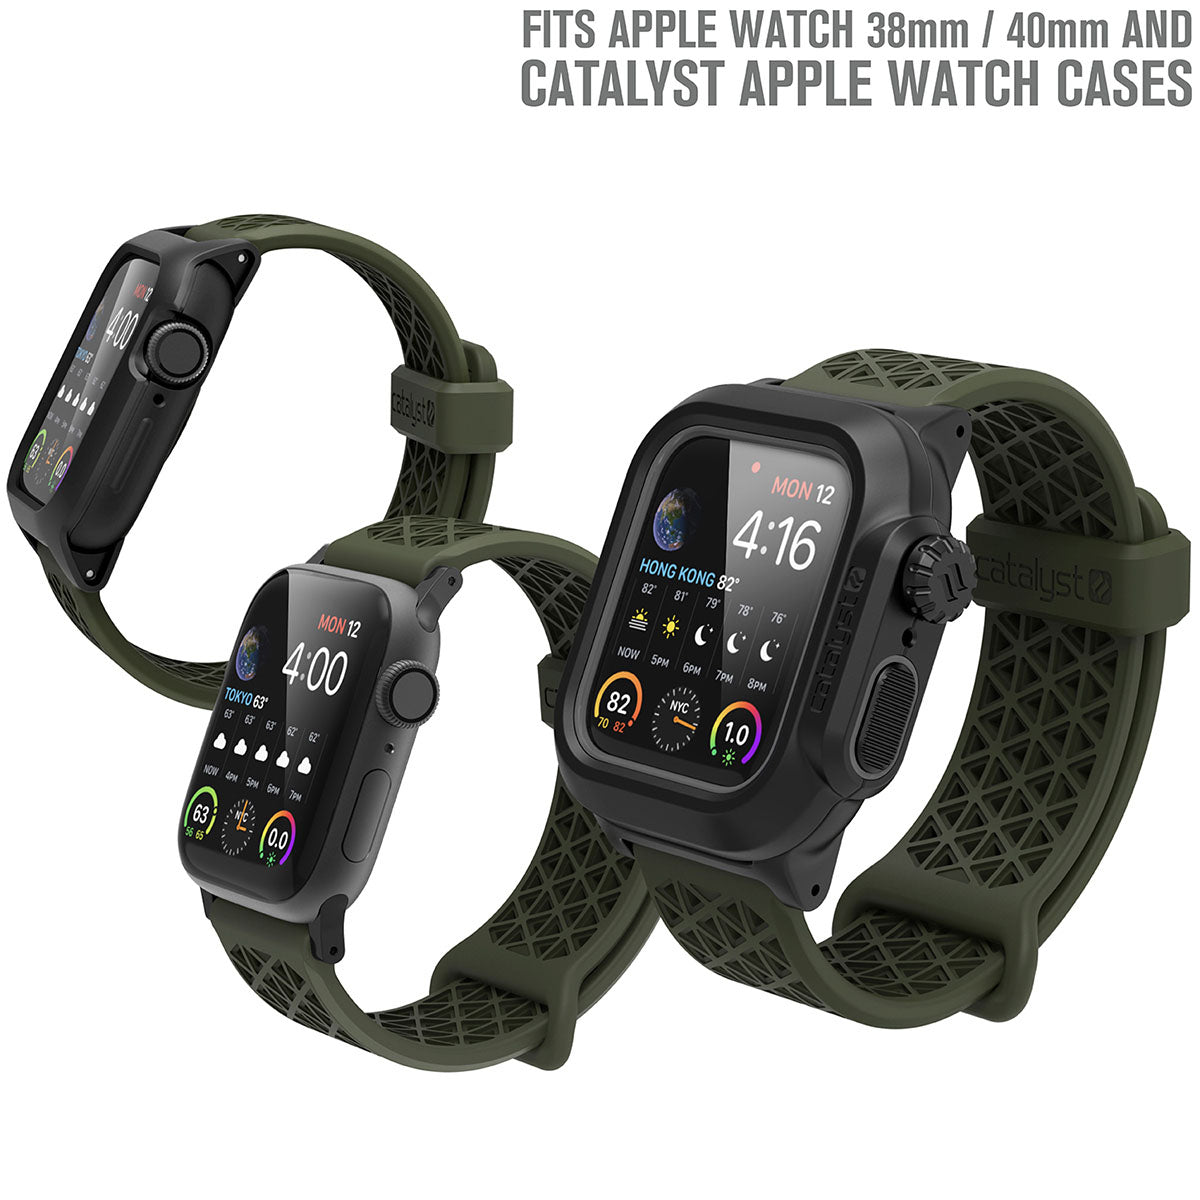 catalyst apple watch series 9 8 7 6 5 4 se gen 2 1 38 40 41mm sports band with apple connector three apple watches with impact and waterproof case with sports band army green text reads fits apple watch 38mm 40mm and catalyst apple watch cases